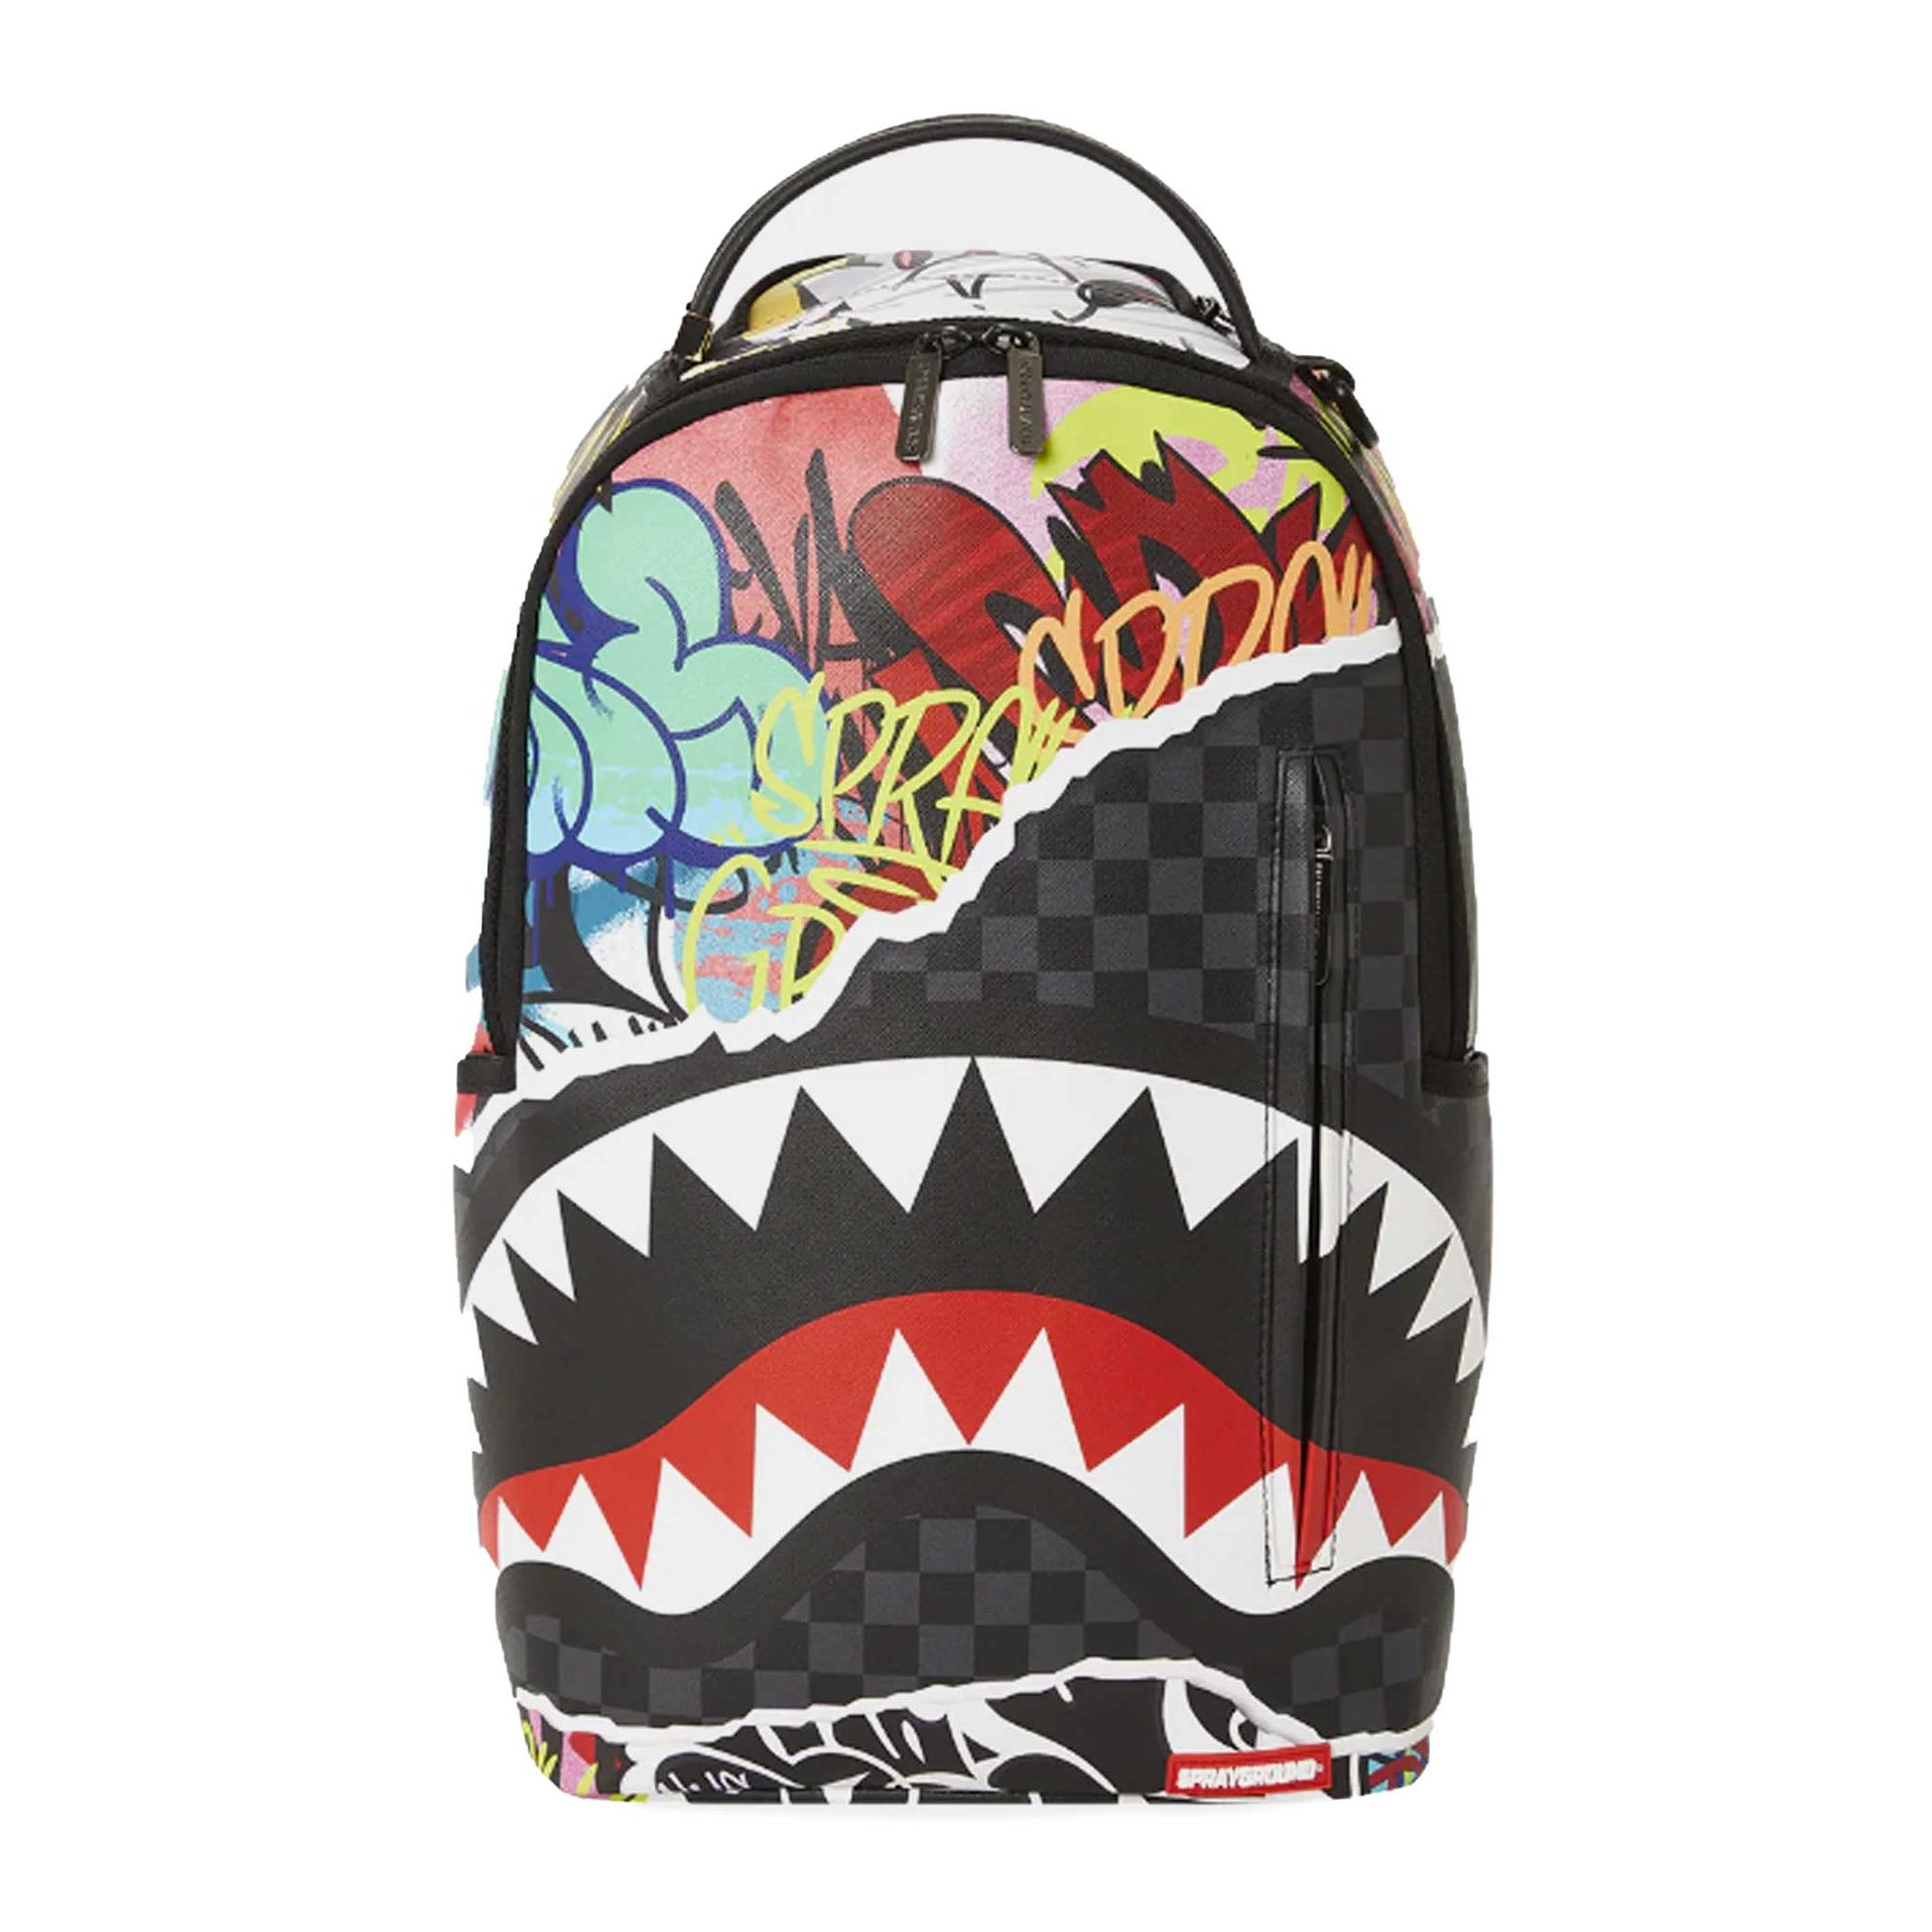 Pull away dlxvf backpack